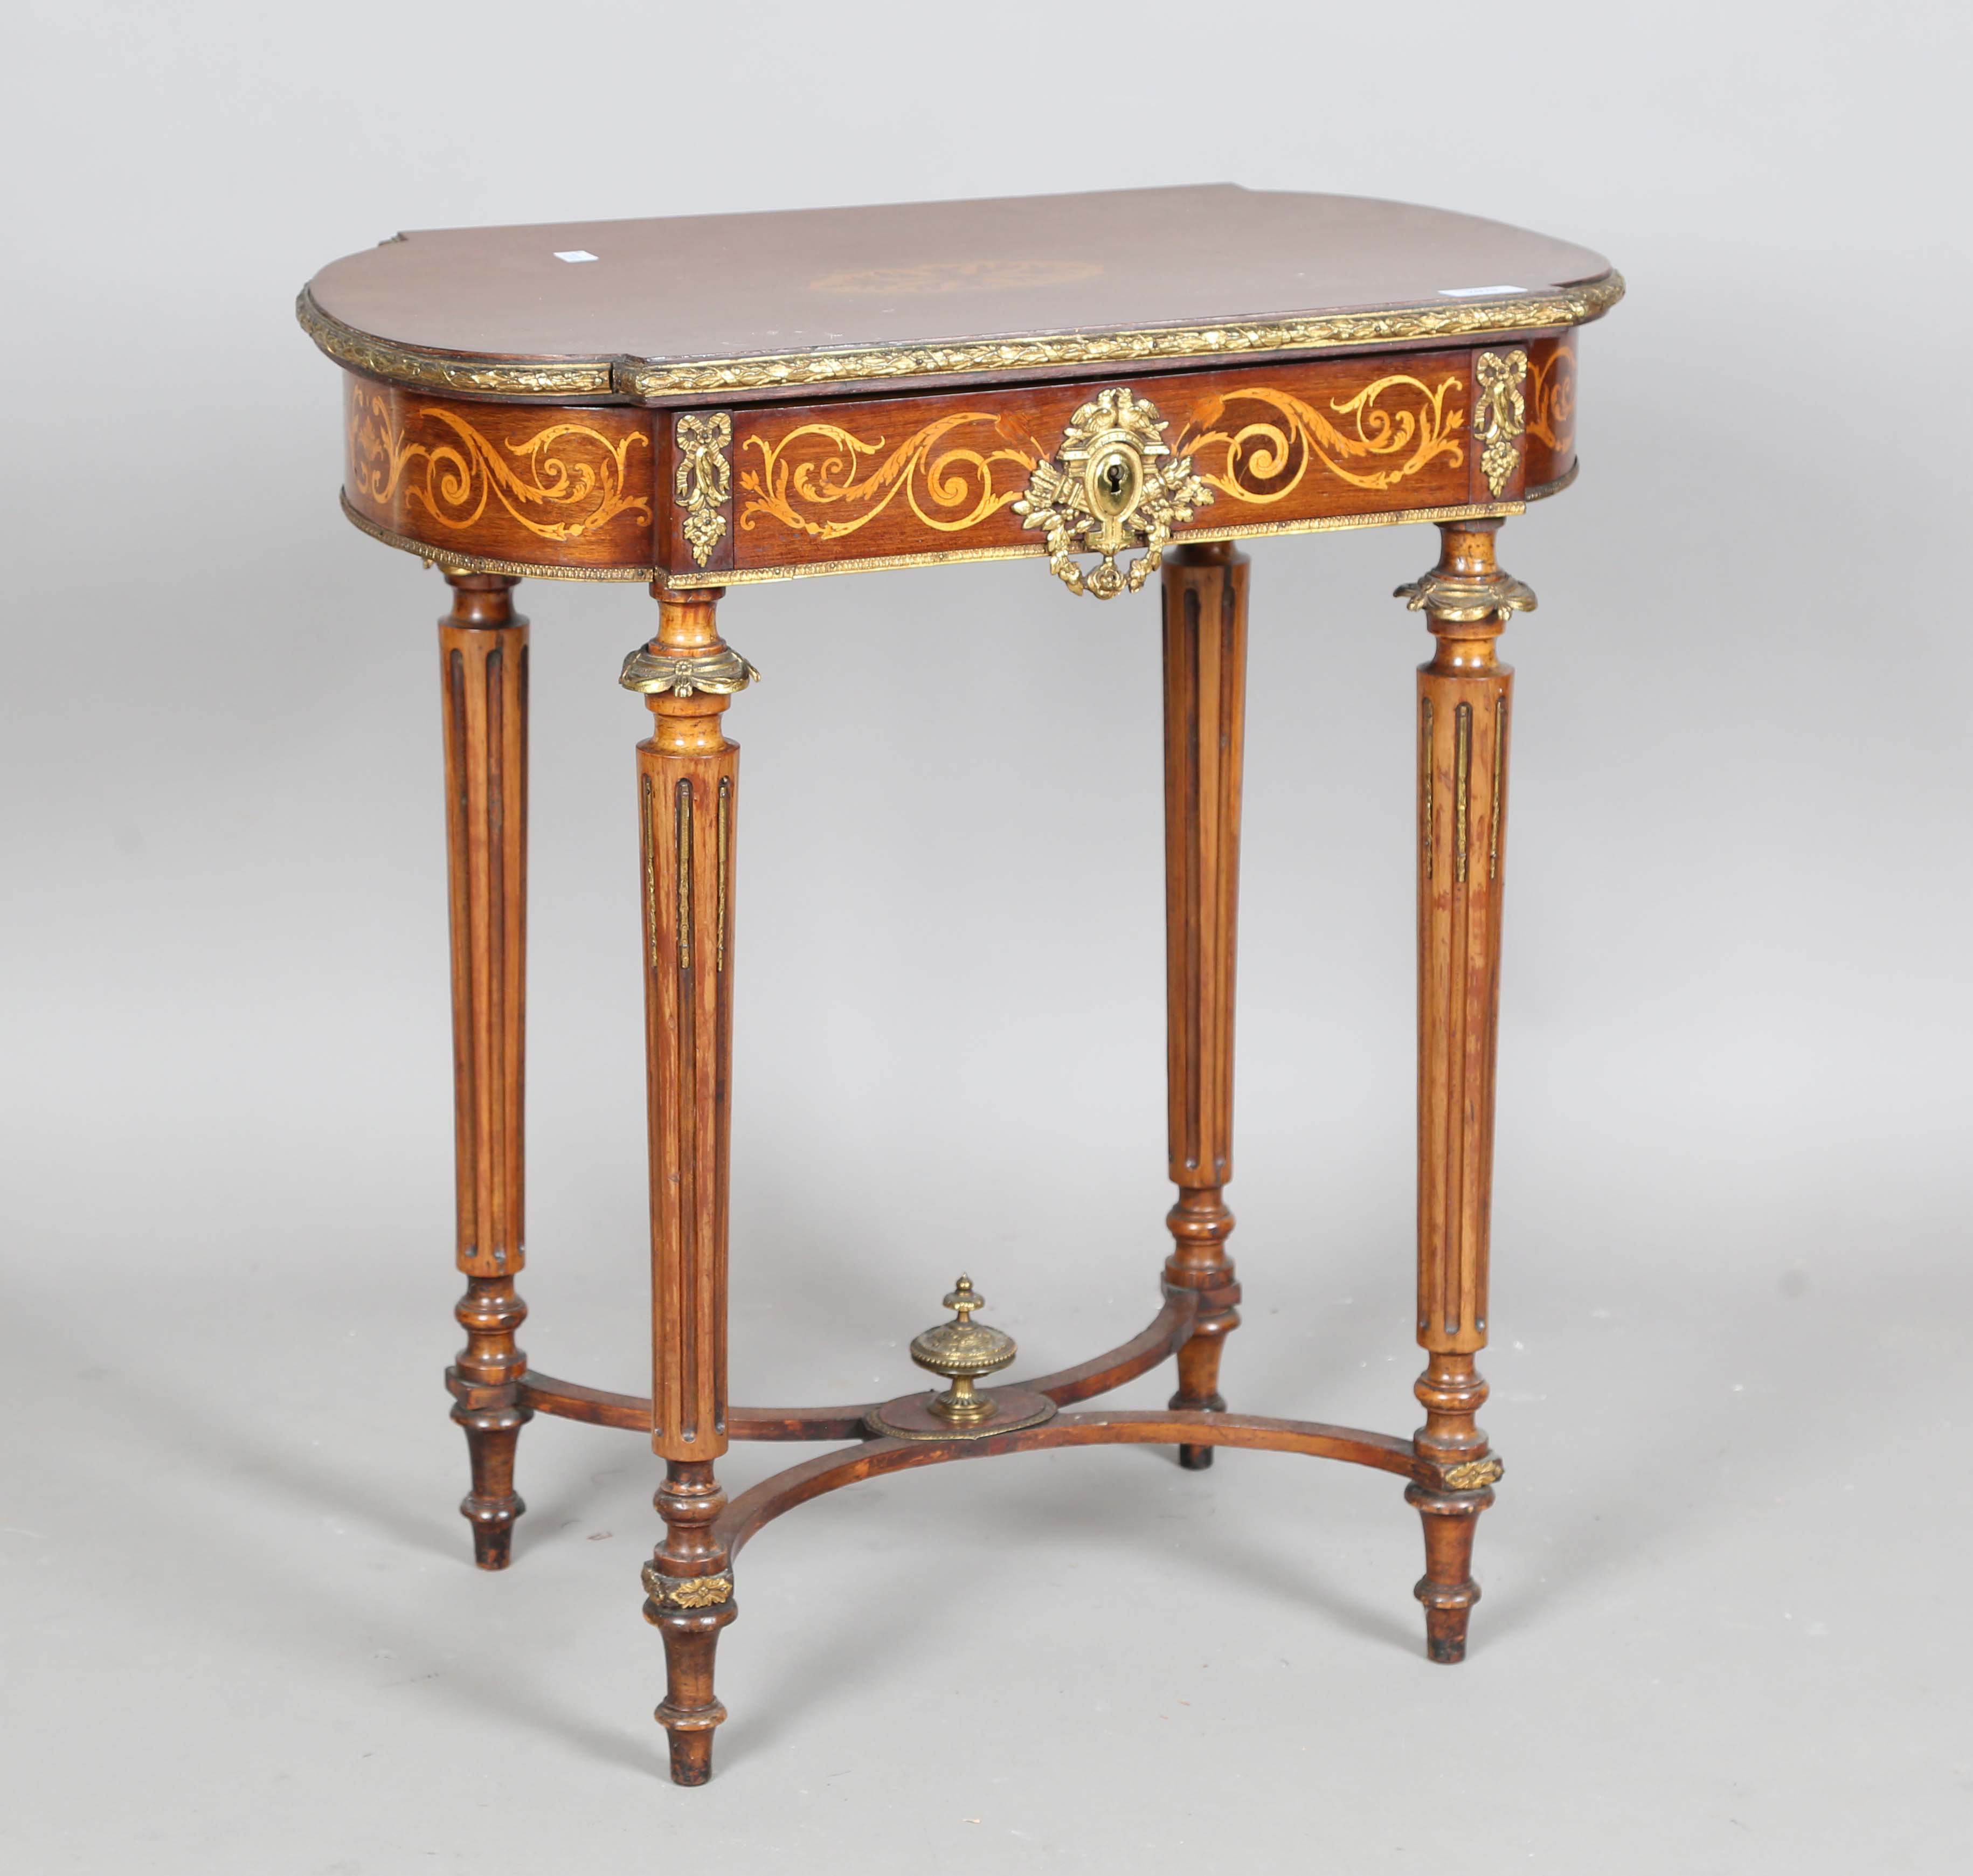 A late 19th century French mahogany and gilt metal mounted poudreuse dressing table, height 70cm,